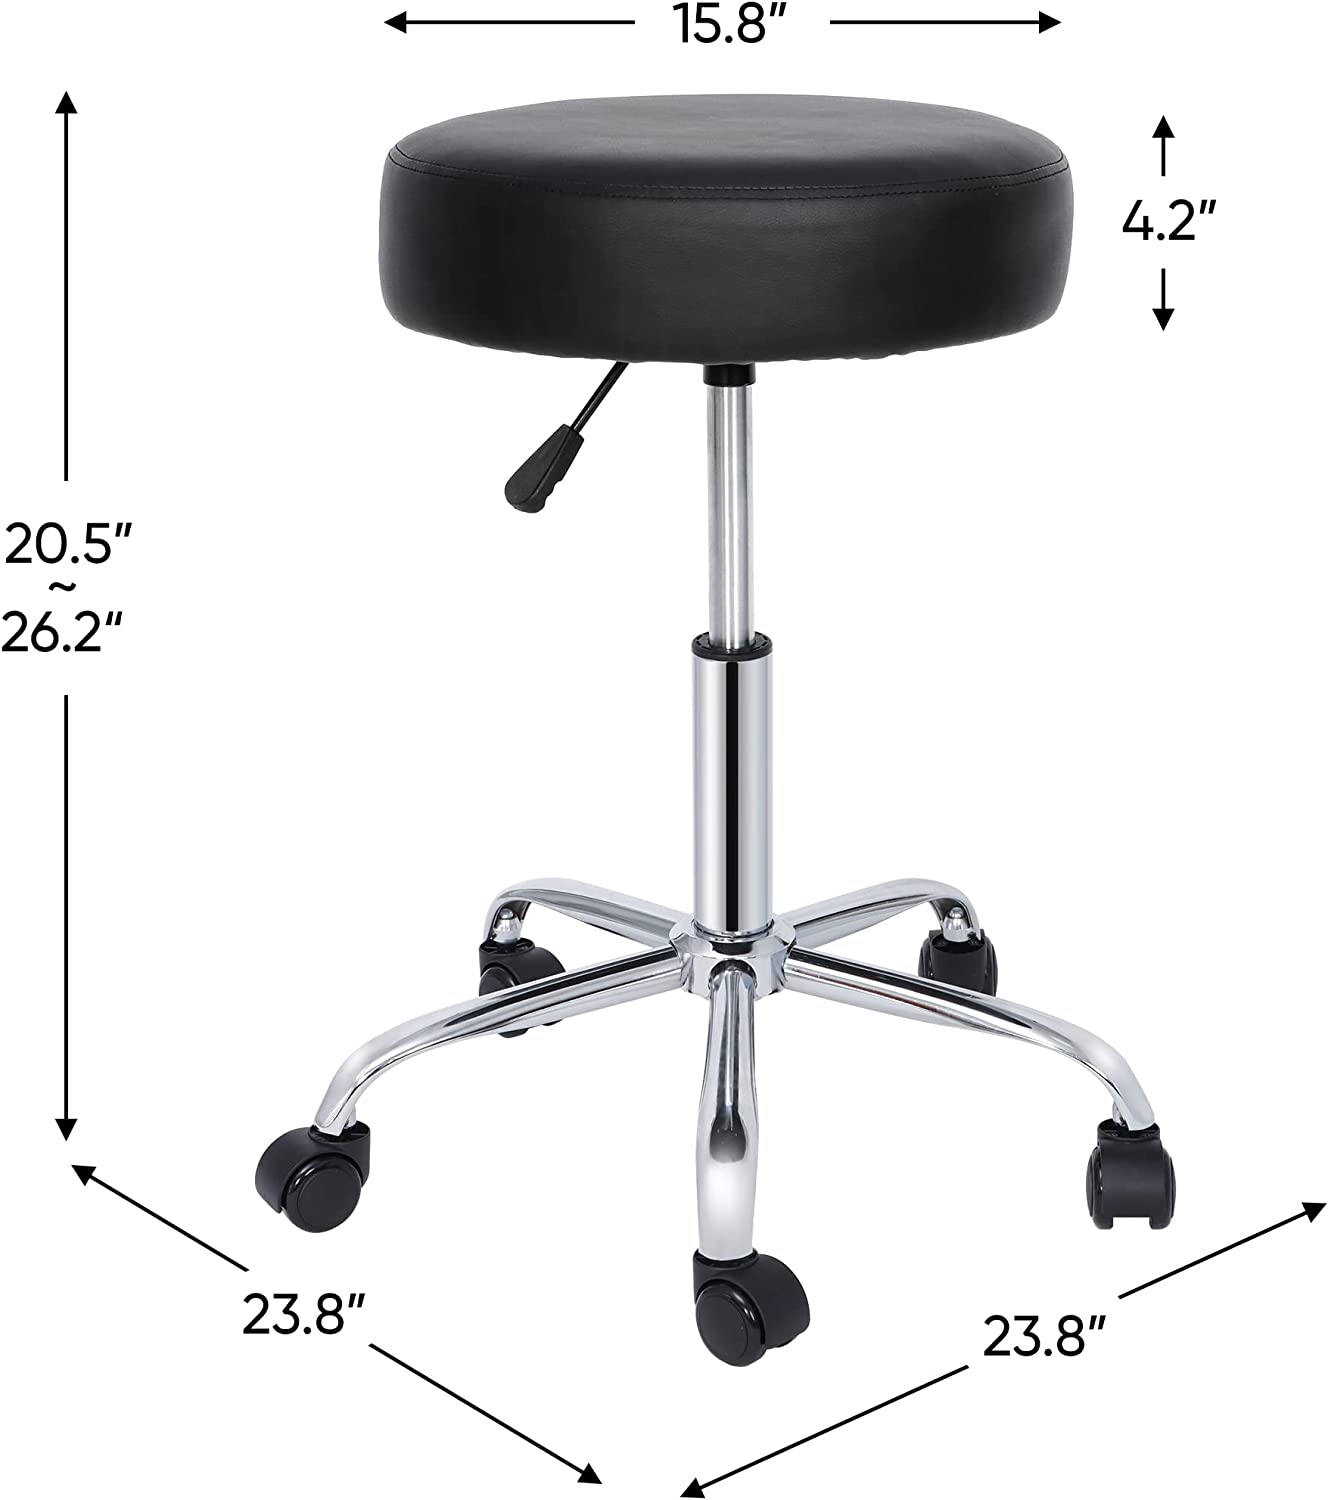 Adjustable Rolling Stool Chair Salon Spa Stool Hydraulic Swivel Stool with Wheels and Ultra-Thick Seat Cushion Beauty Massage Tattoo Medical Drafting Office Stool Task Chair, Black